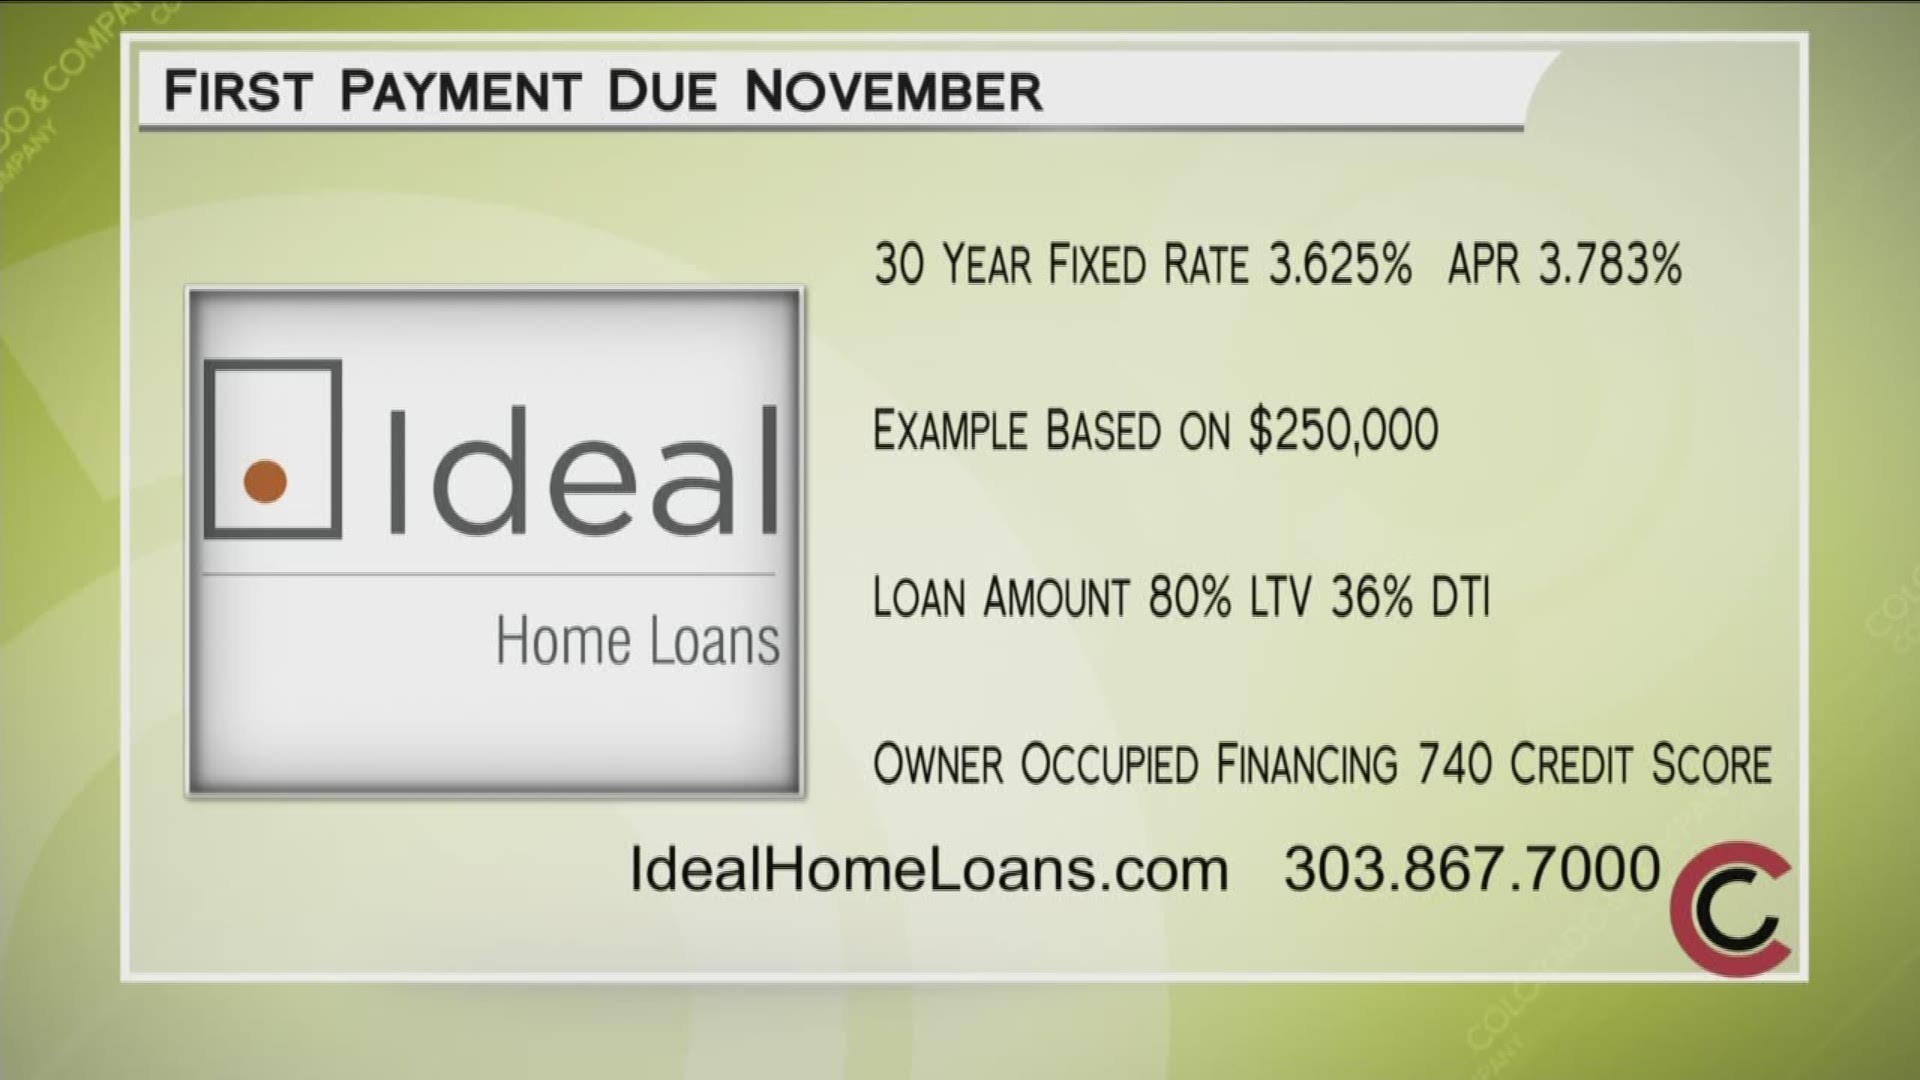 Take advantage of Ideal Home Loans’ free home mortgage consultation. Your first payment won’t be due until November! Their philosophy is “First we listen, then we lend.” Get started today by calling 303.867.7000, or online at www.IdealHomeLoans.com.
 THIS INTERVIEW HAS COMMERCIAL CONTENT. PRODUCTS AND SERVICES FEATURED APPEAR AS PAID ADVERTISING.